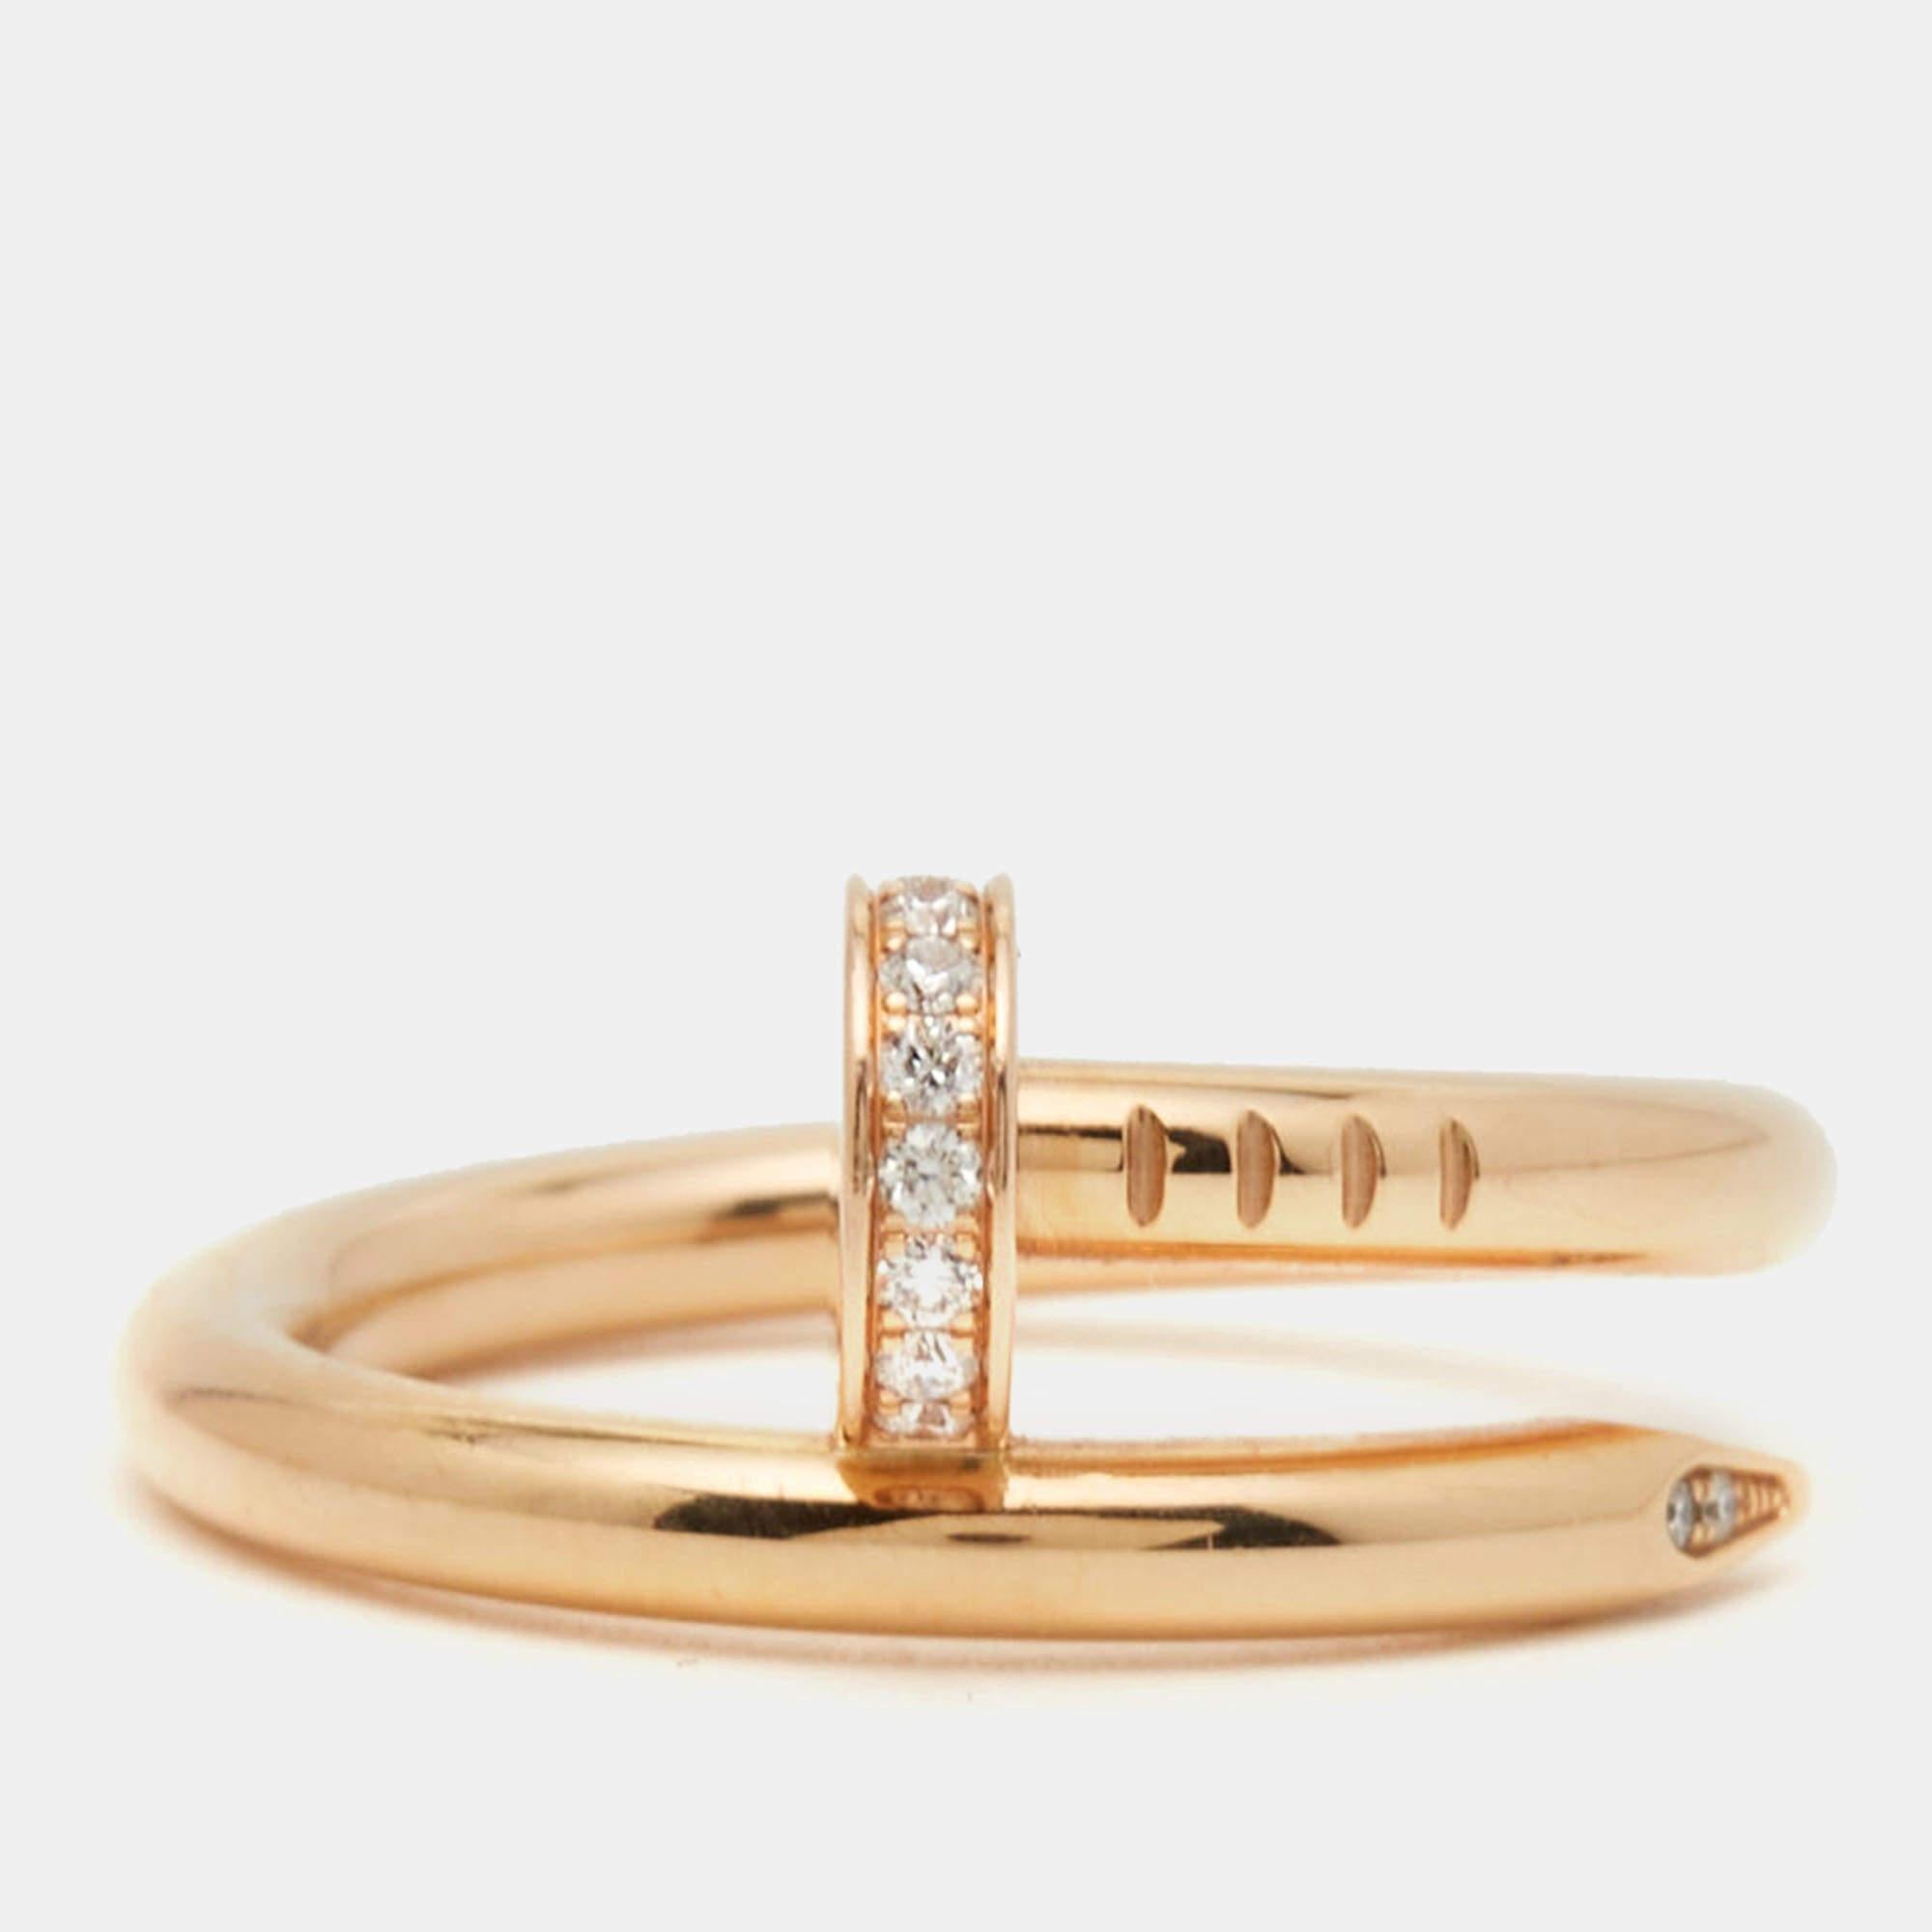 The Cartier Juste Un Clou ring is an iconic and luxurious piece of jewelry. Crafted from gleaming 18k rose gold and diamonds, its sleek and minimalist design captures the essence of a nail transformed into an elegant and distinctive fashion